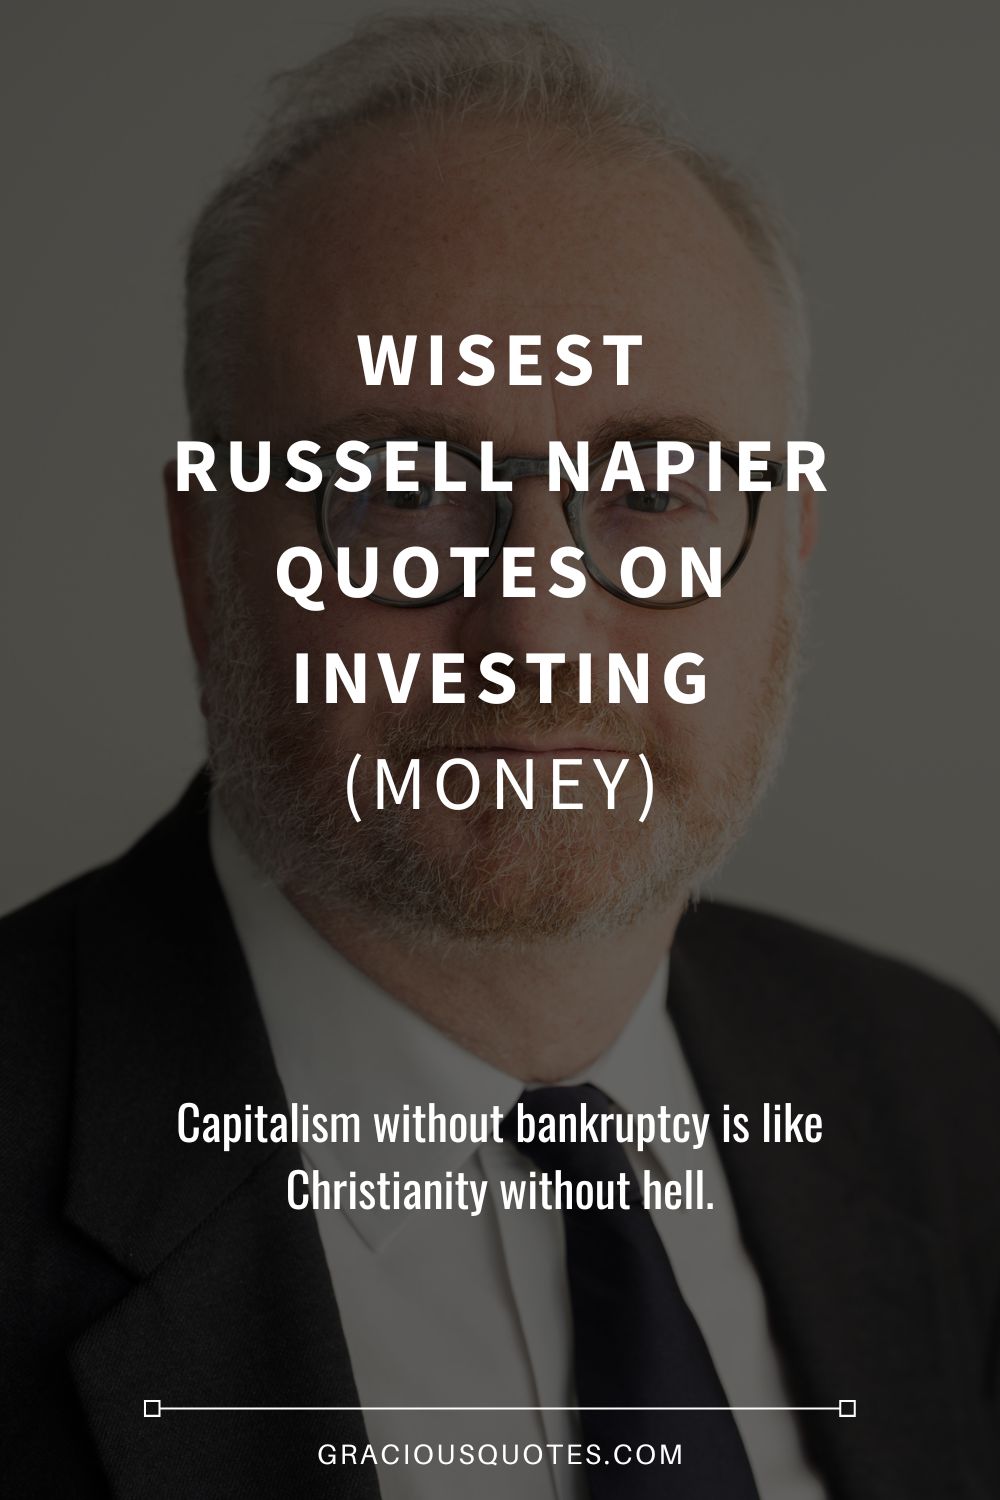 Wisest Russell Napier Quotes on Investing (MONEY) - Gracious Quotes